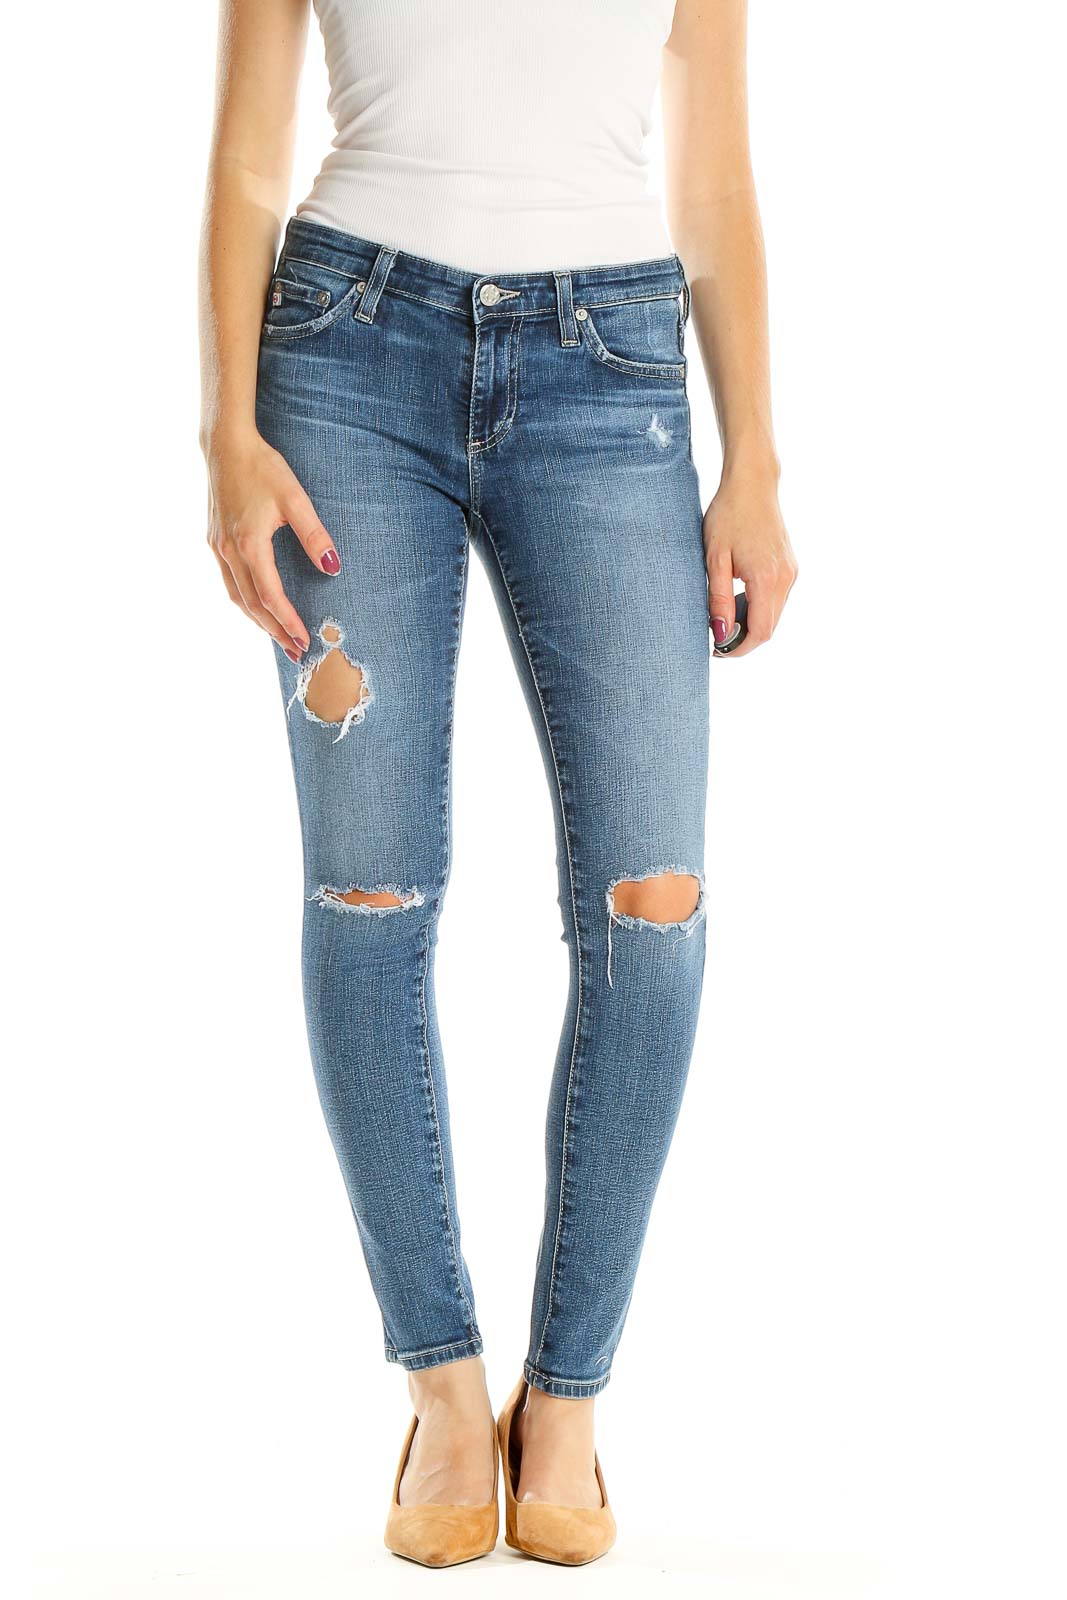 Blue Distressed Skinny Jeans Front